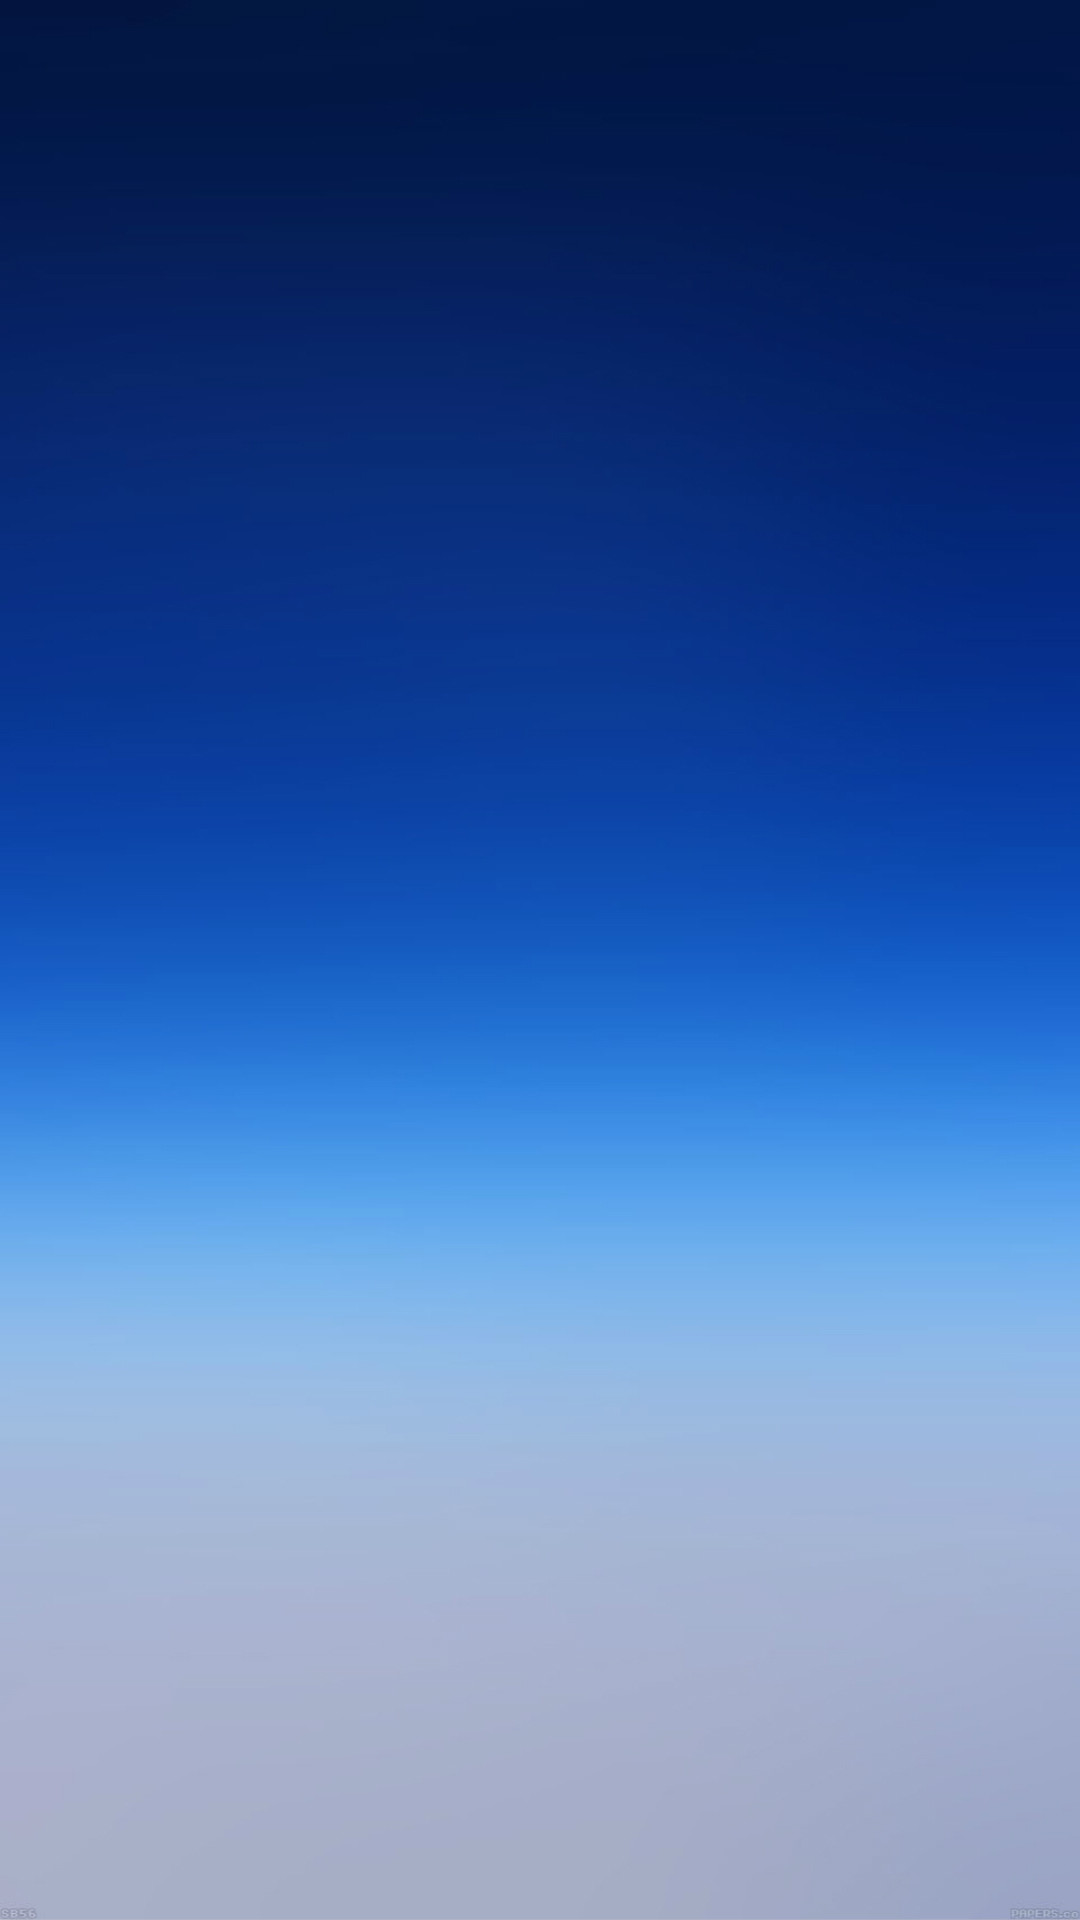 1080x1920 Abstract-Pure-Simple-Blue-Gradient-Color-Background-iphone-6-wallpaper -ilikewallpaper_com